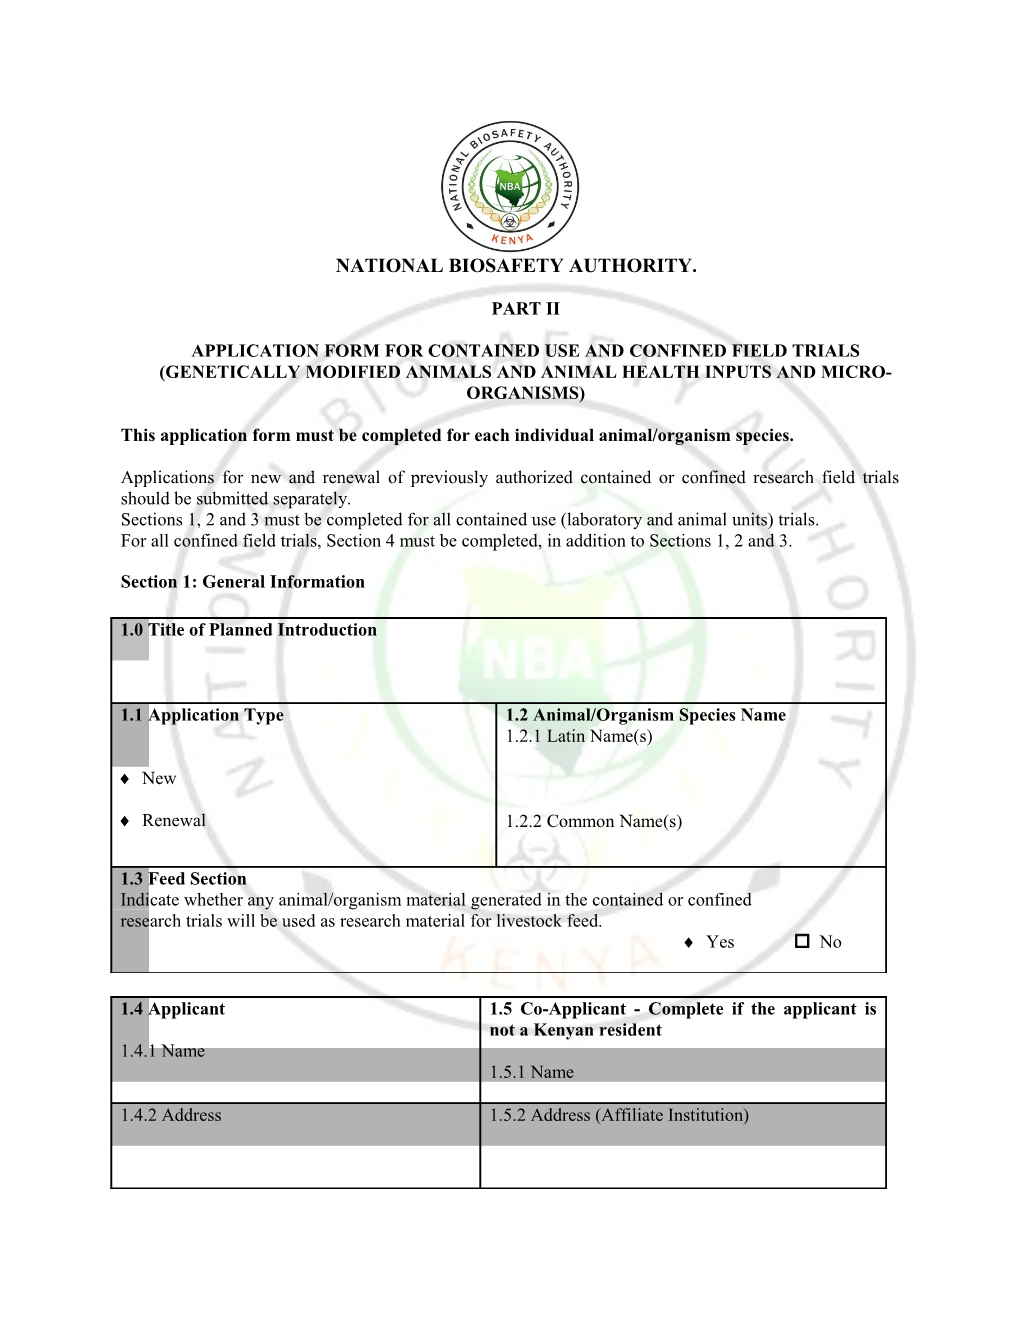 This Application Form Must Be Completed for Each Individual Animal/Organism Species